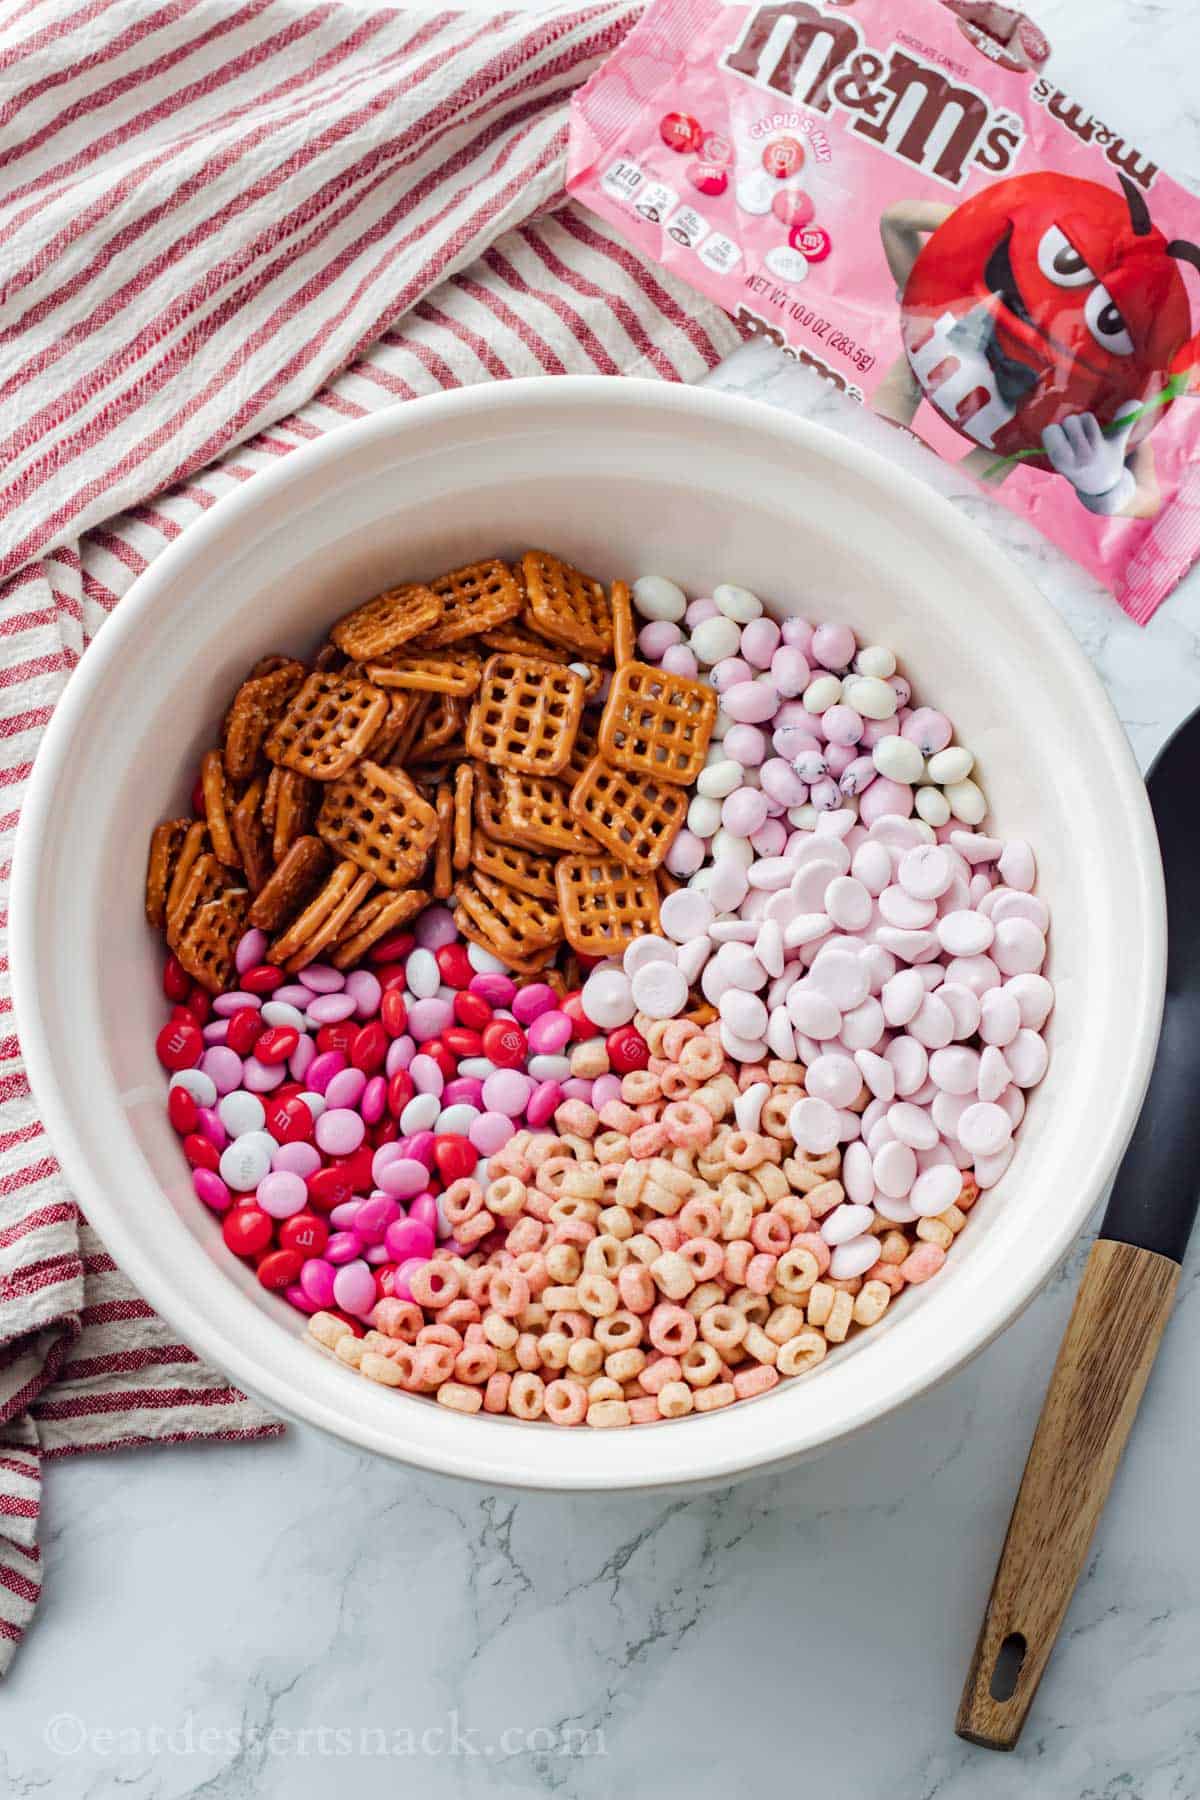 Ingredients for Valentines Trail Mix in a large white ceramic bowl on marble with wooden spoon and red and white striped towel.